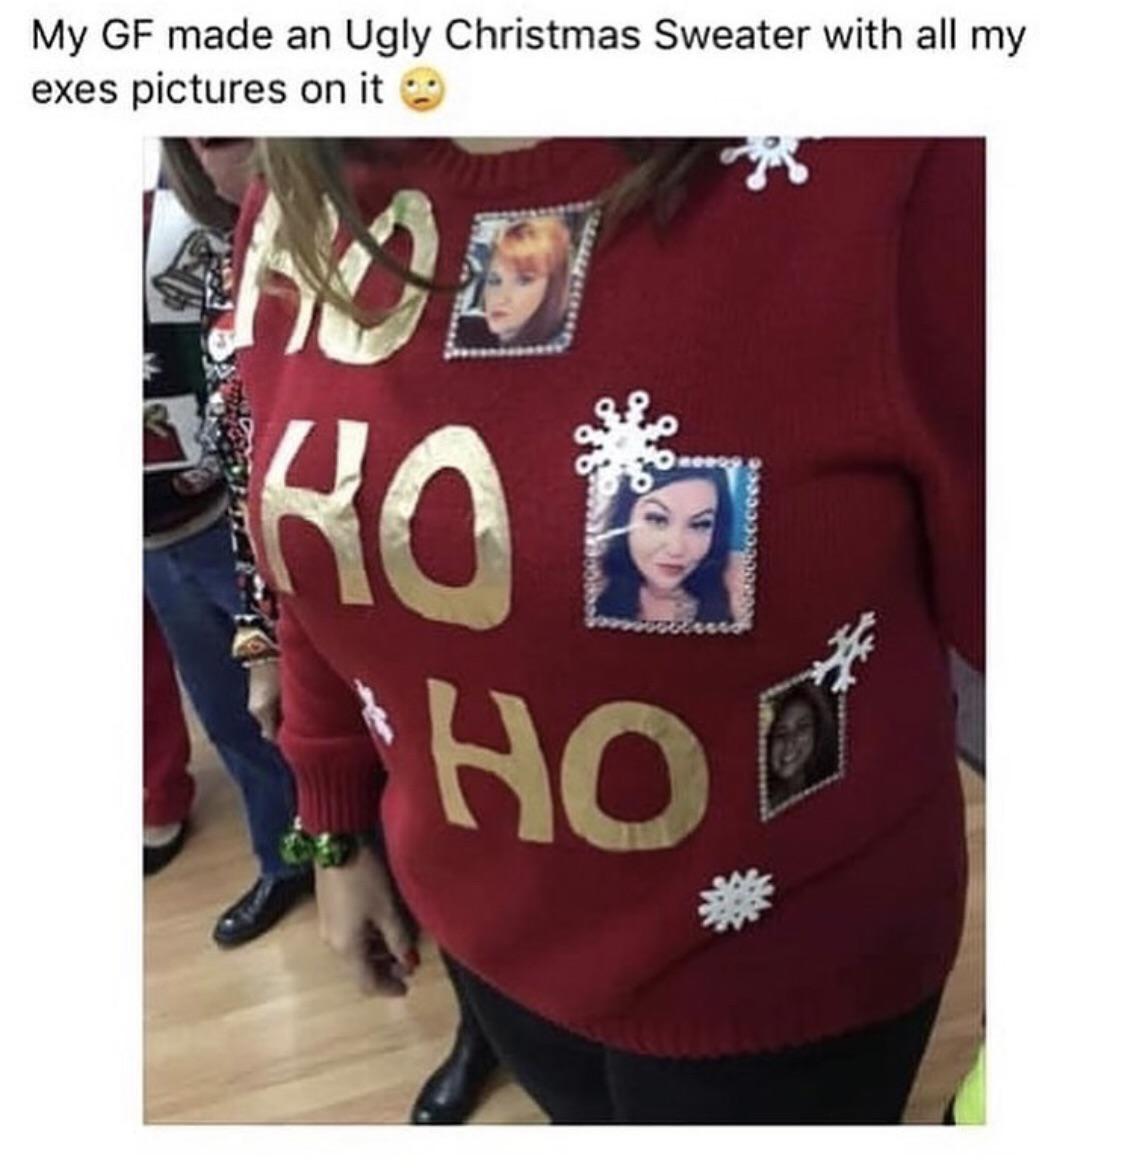 ex girlfriend christmas sweater - My Gf made an Ugly Christmas Sweater with all my exes pictures on it Ro Woococceece 'Hod